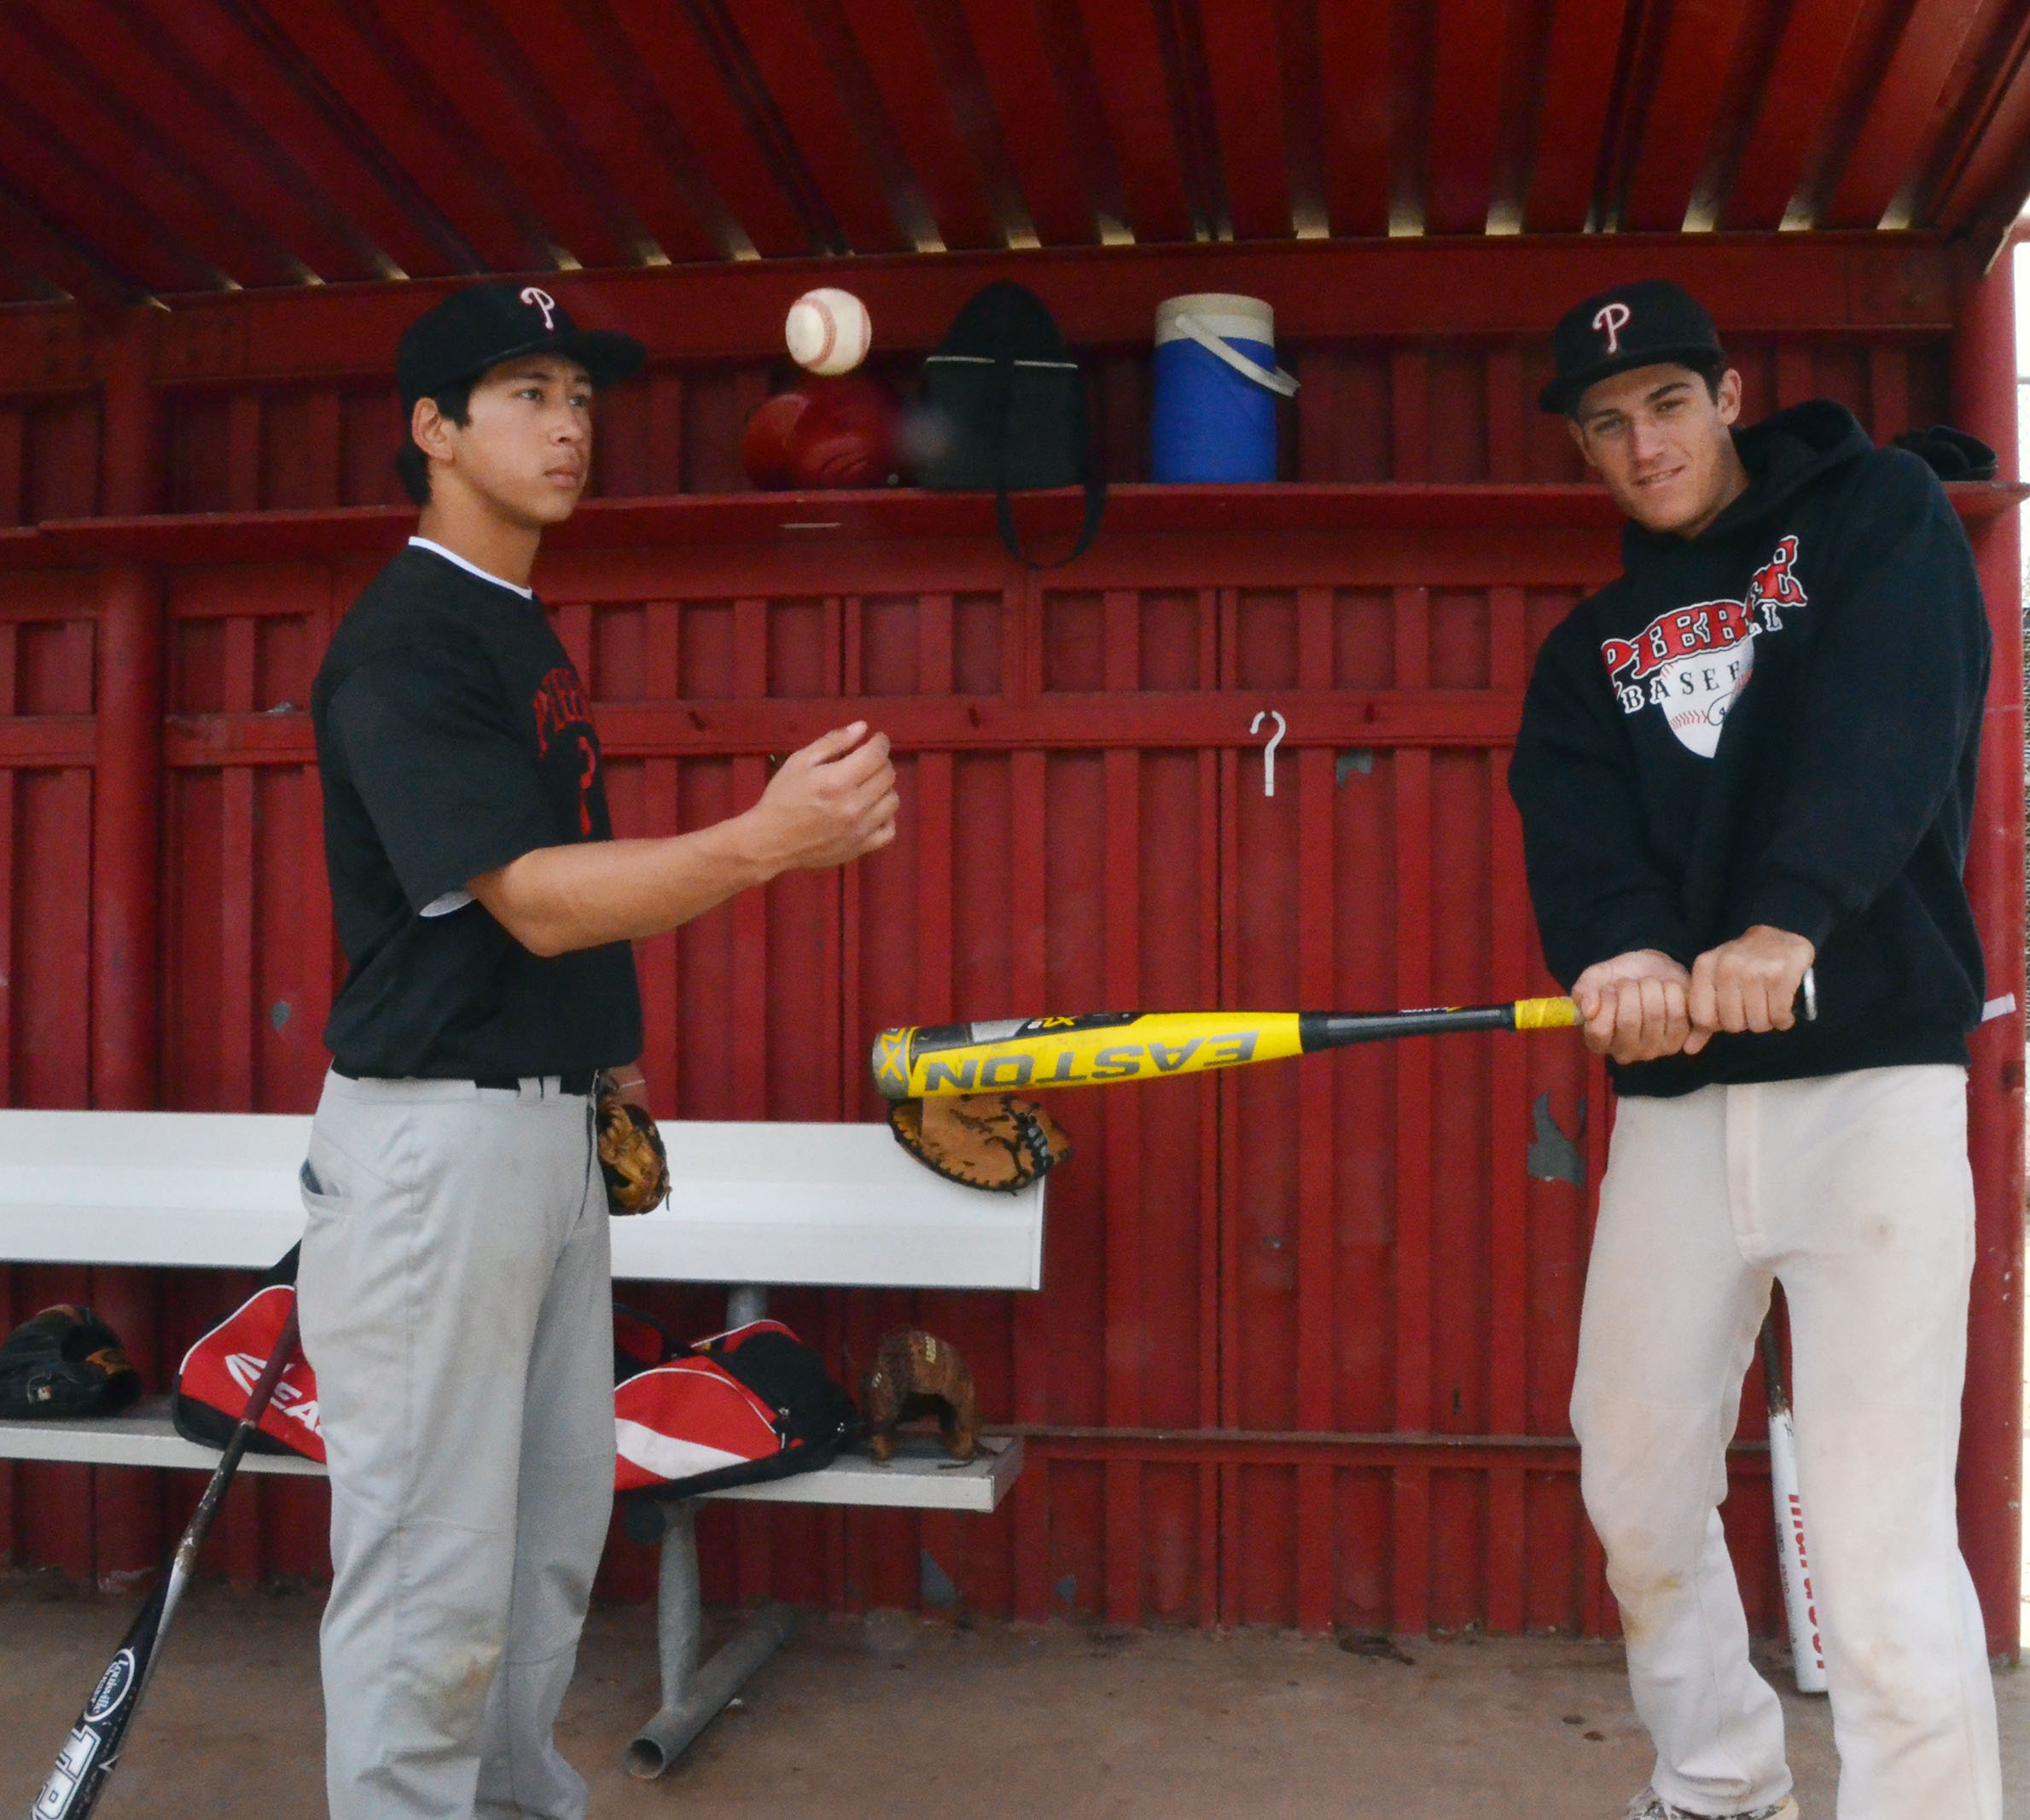 Pierce baseball players find second chance to succeed at game they love